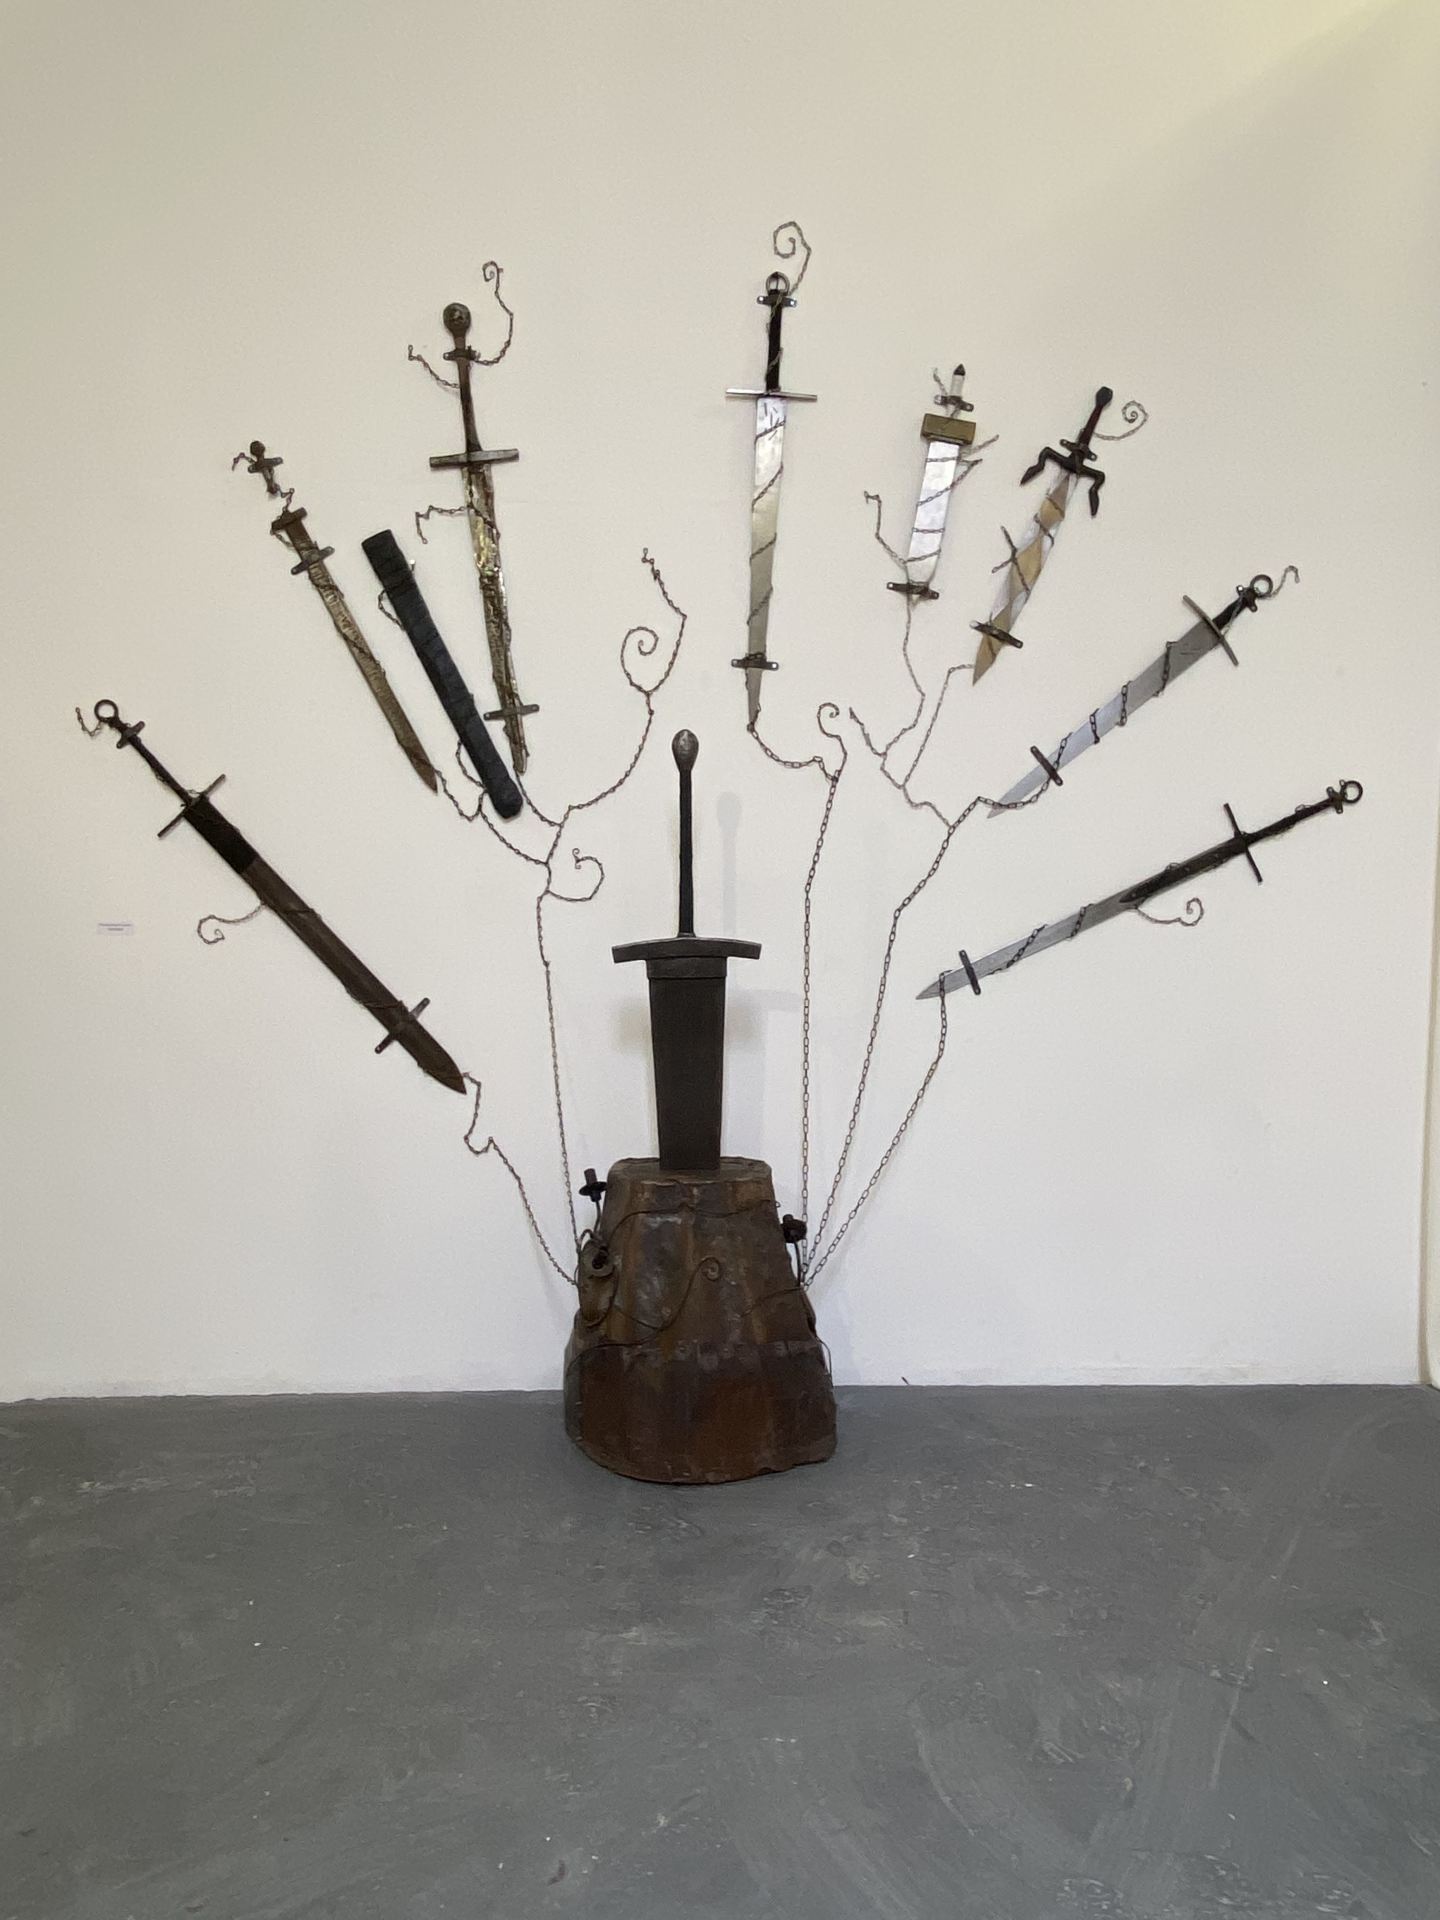 Several swords are wrapped in chains and hang from a white wall. The largest sword emerges  from a brown tree stump in the centre of the composition.